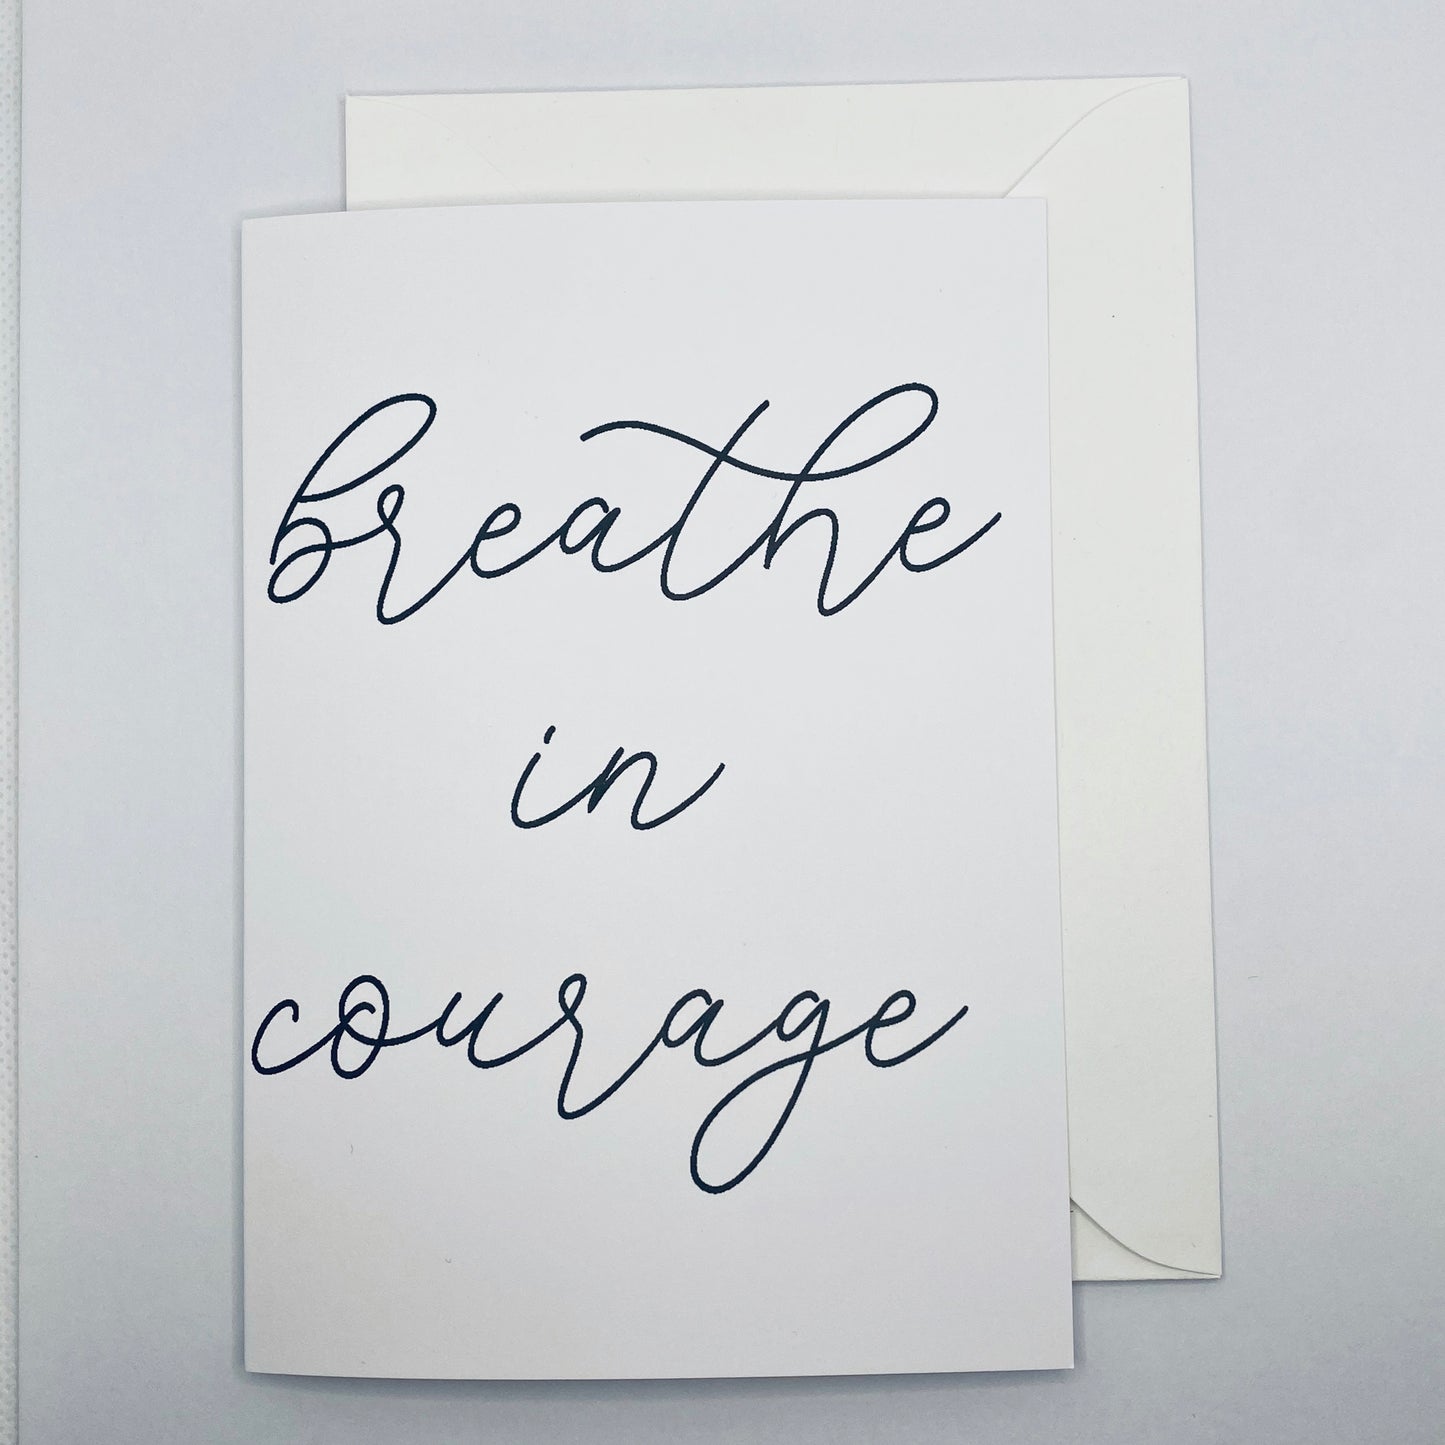 Breathe in Courage Greeting Card